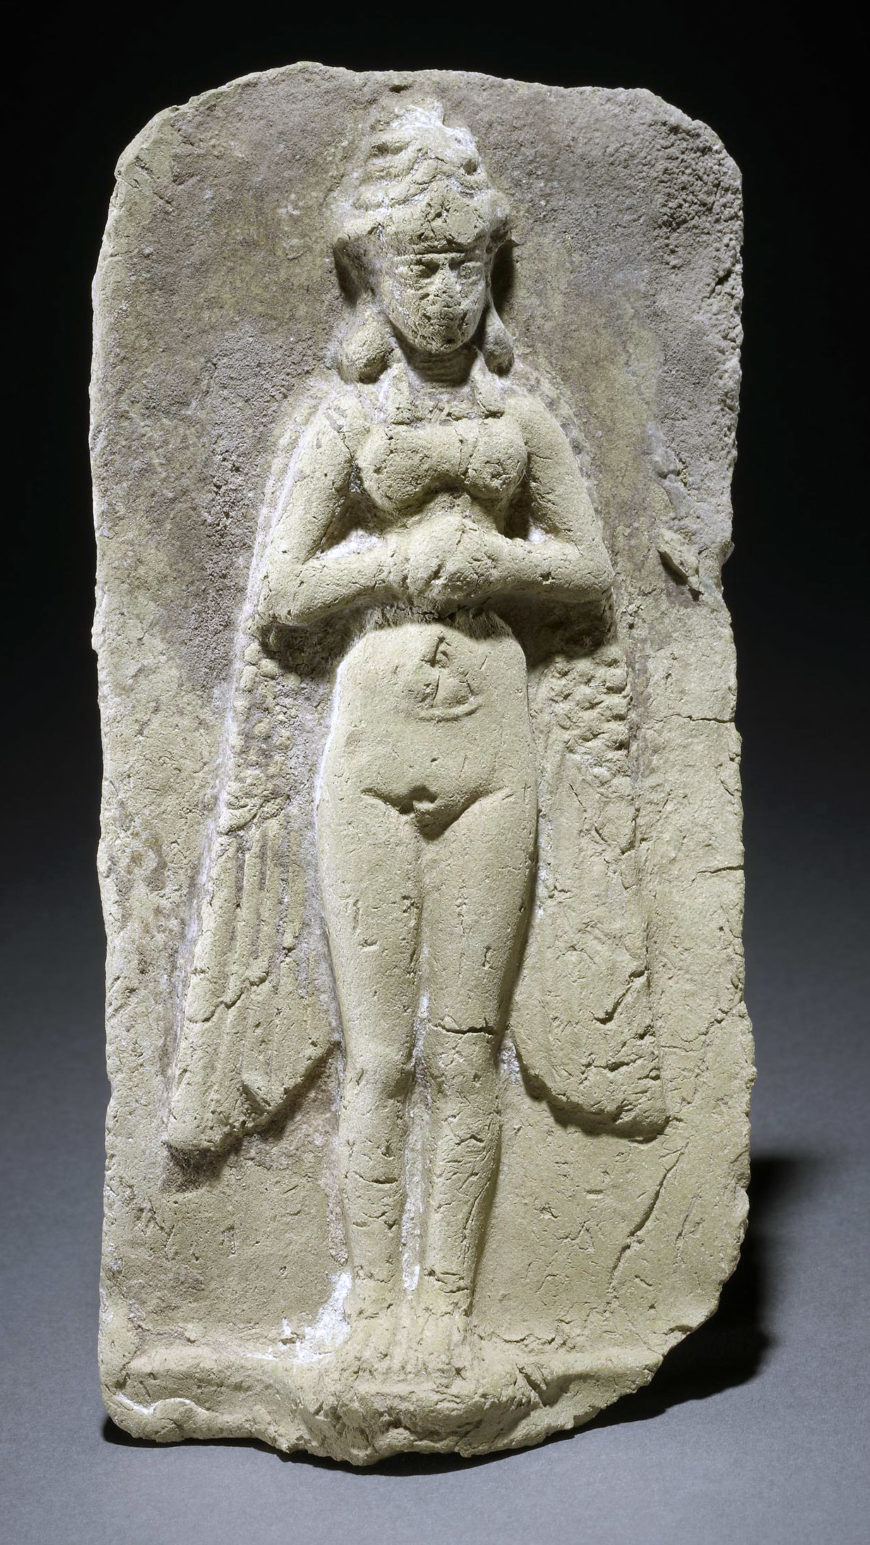 Fired clay plaque, Old Babylonian, c. 1750 B.C.E., found in southern Iraq, 17.5 cm high (© Trustees of the British Museum)